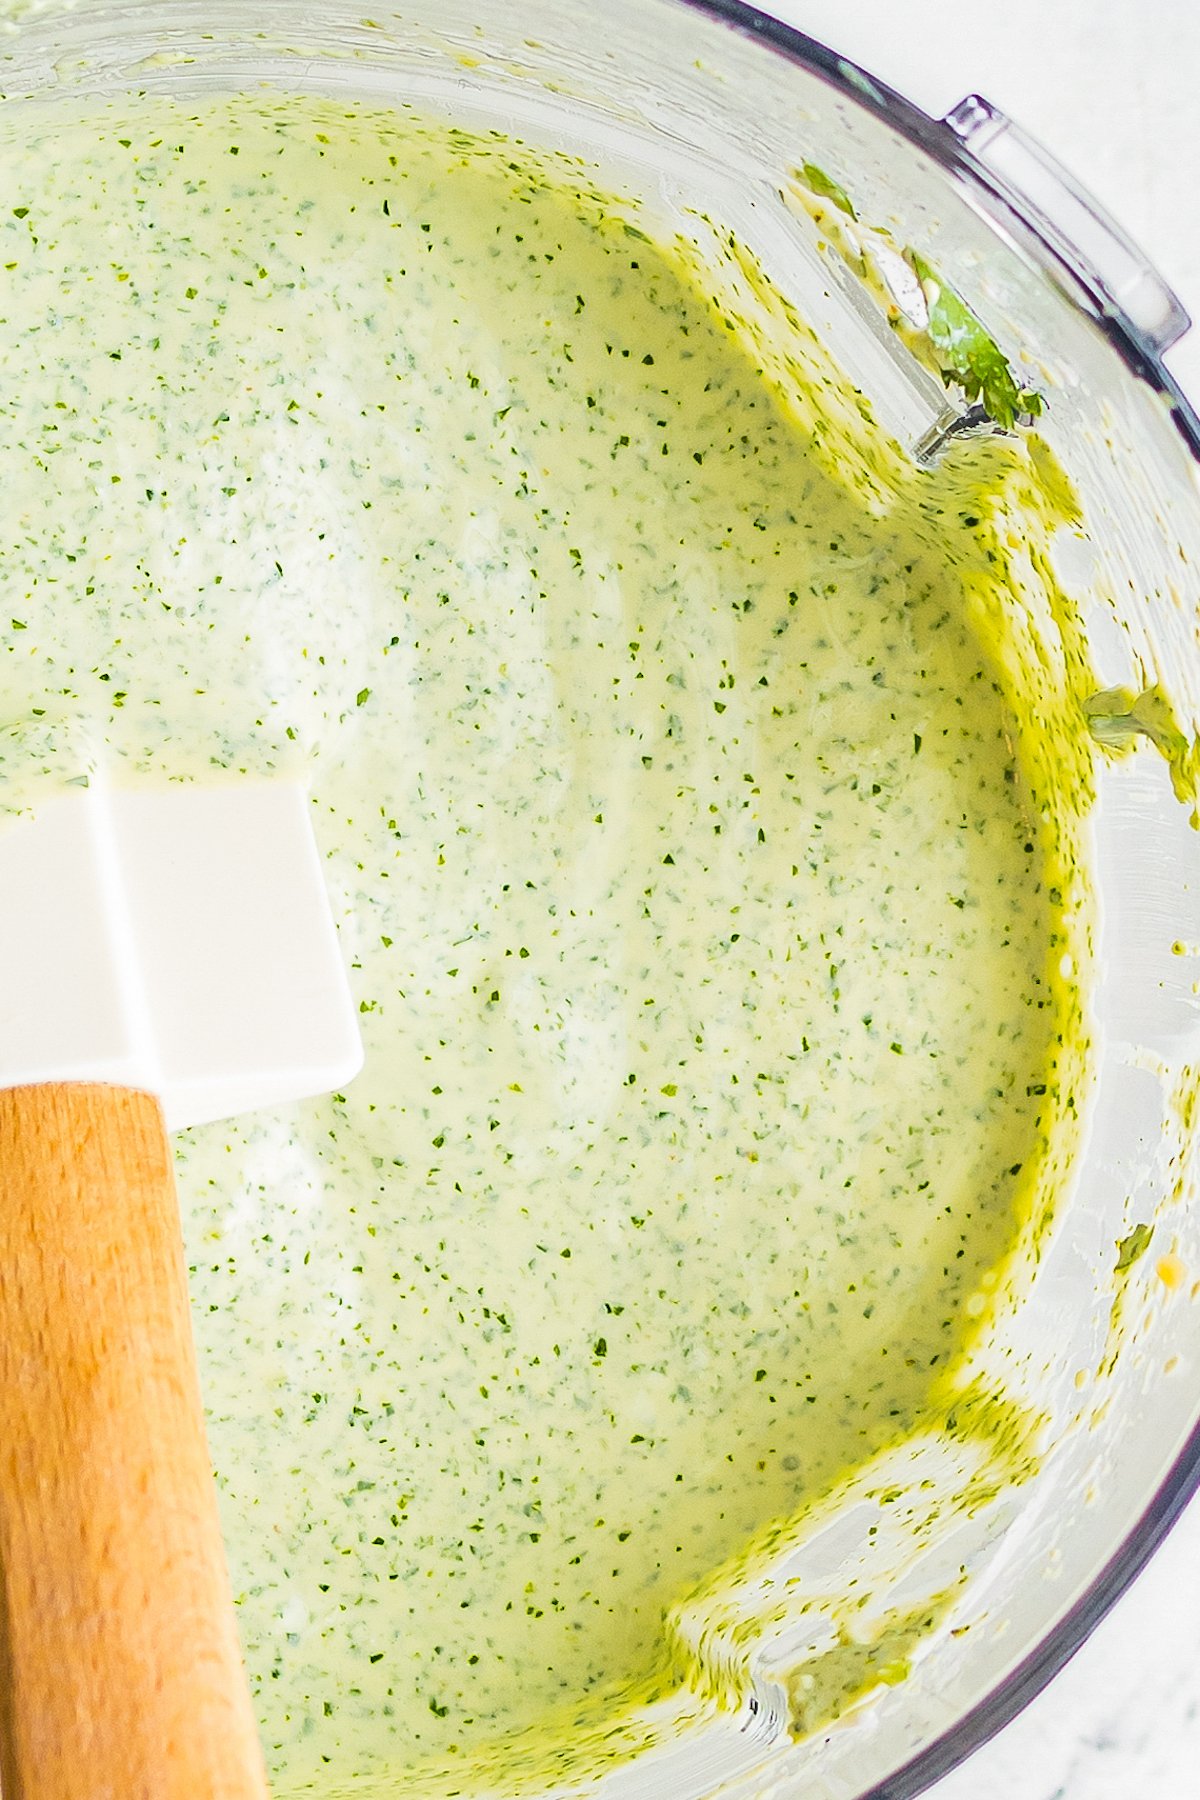 Close-up shot of creamy cilantro lime dressing, to show the texture and color in detail.